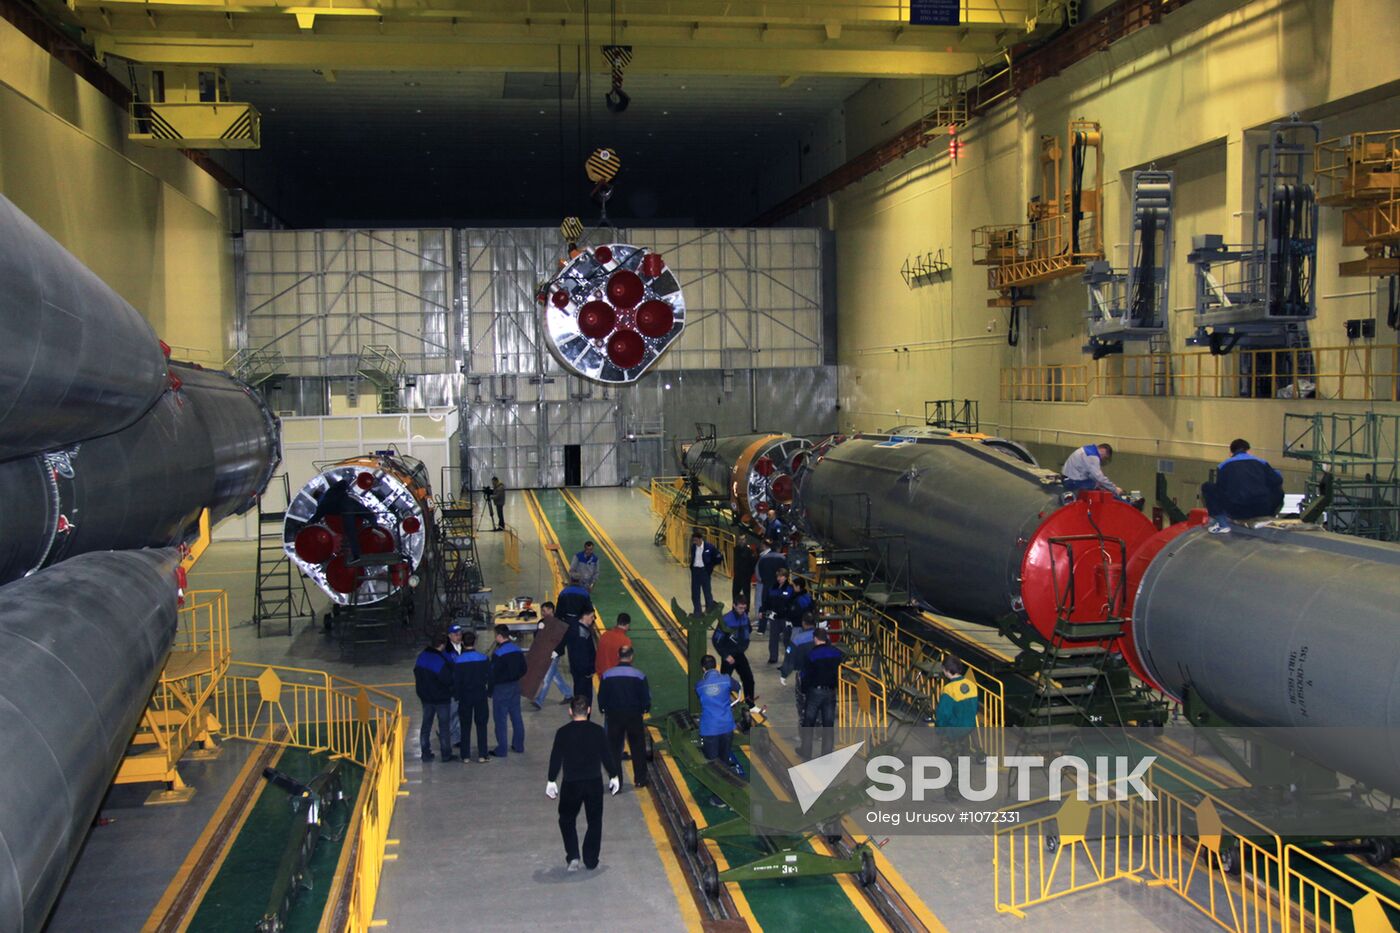 Preparations underway at Baikonur for spacecraft launches